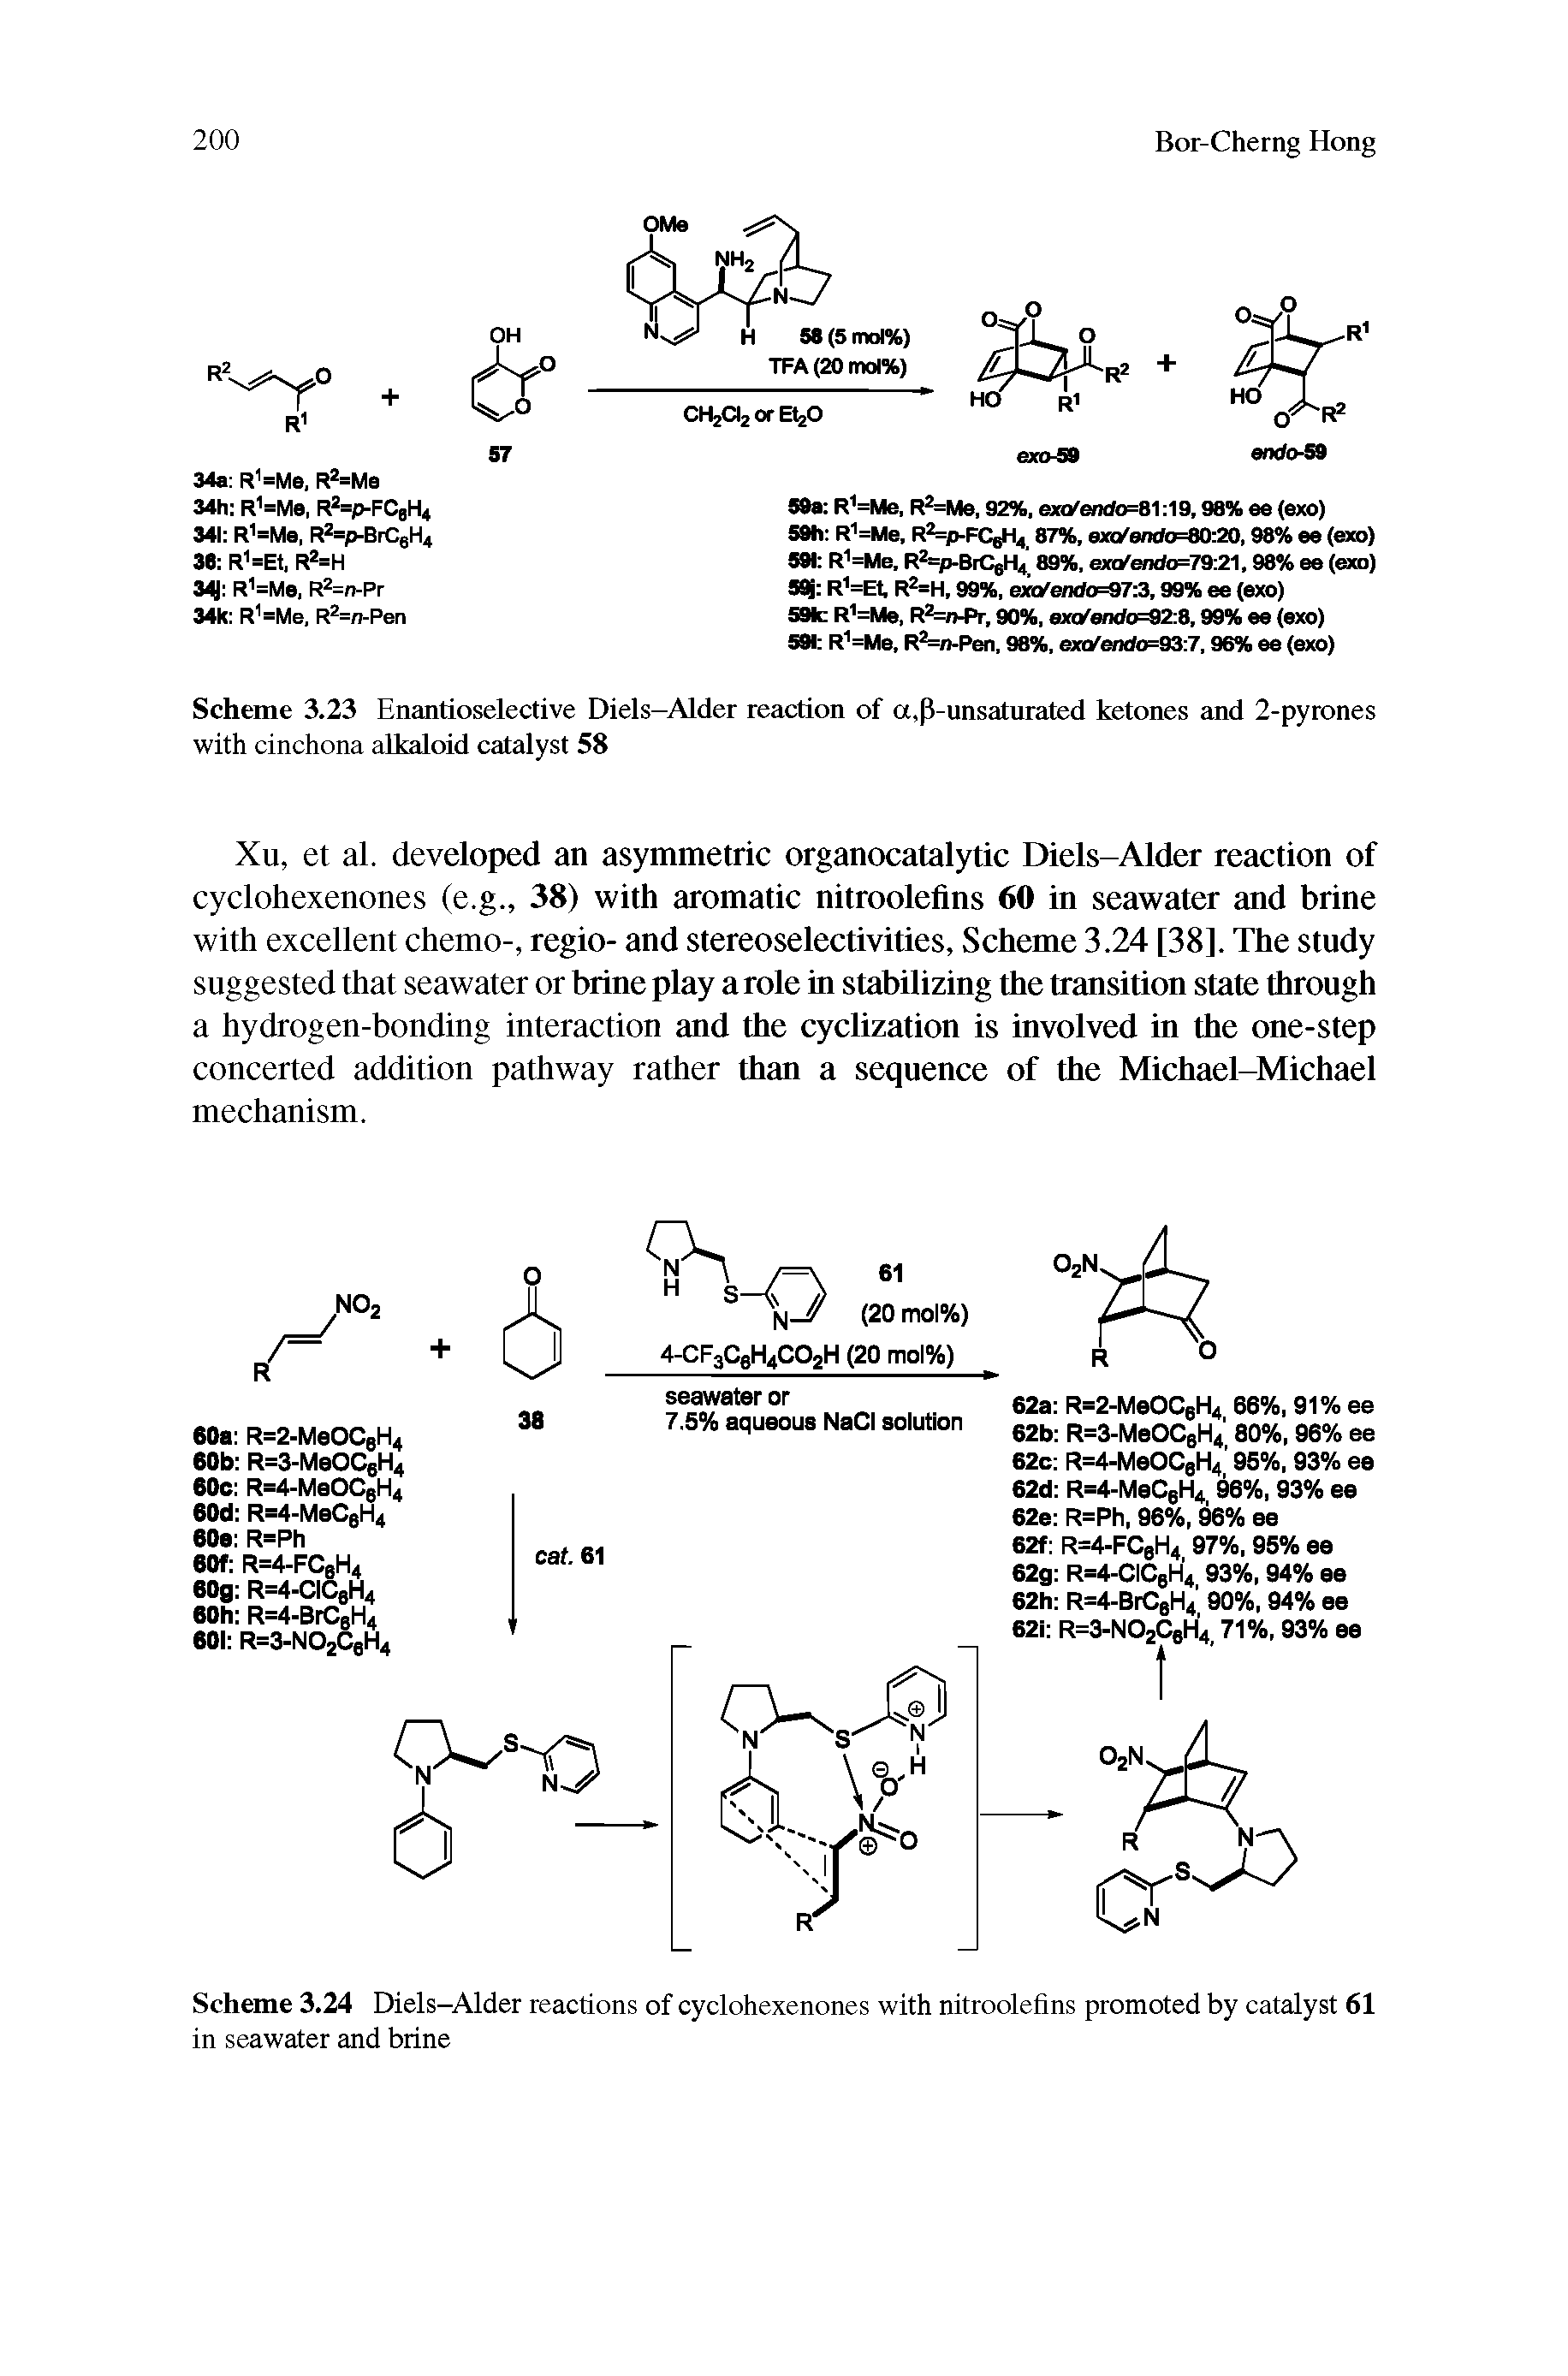 Scheme 3.23 Enantioselective Diels-Alder reaction of a,p-unsaturated ketones and 2-pyrones with cinchona alkaloid catalyst 58...